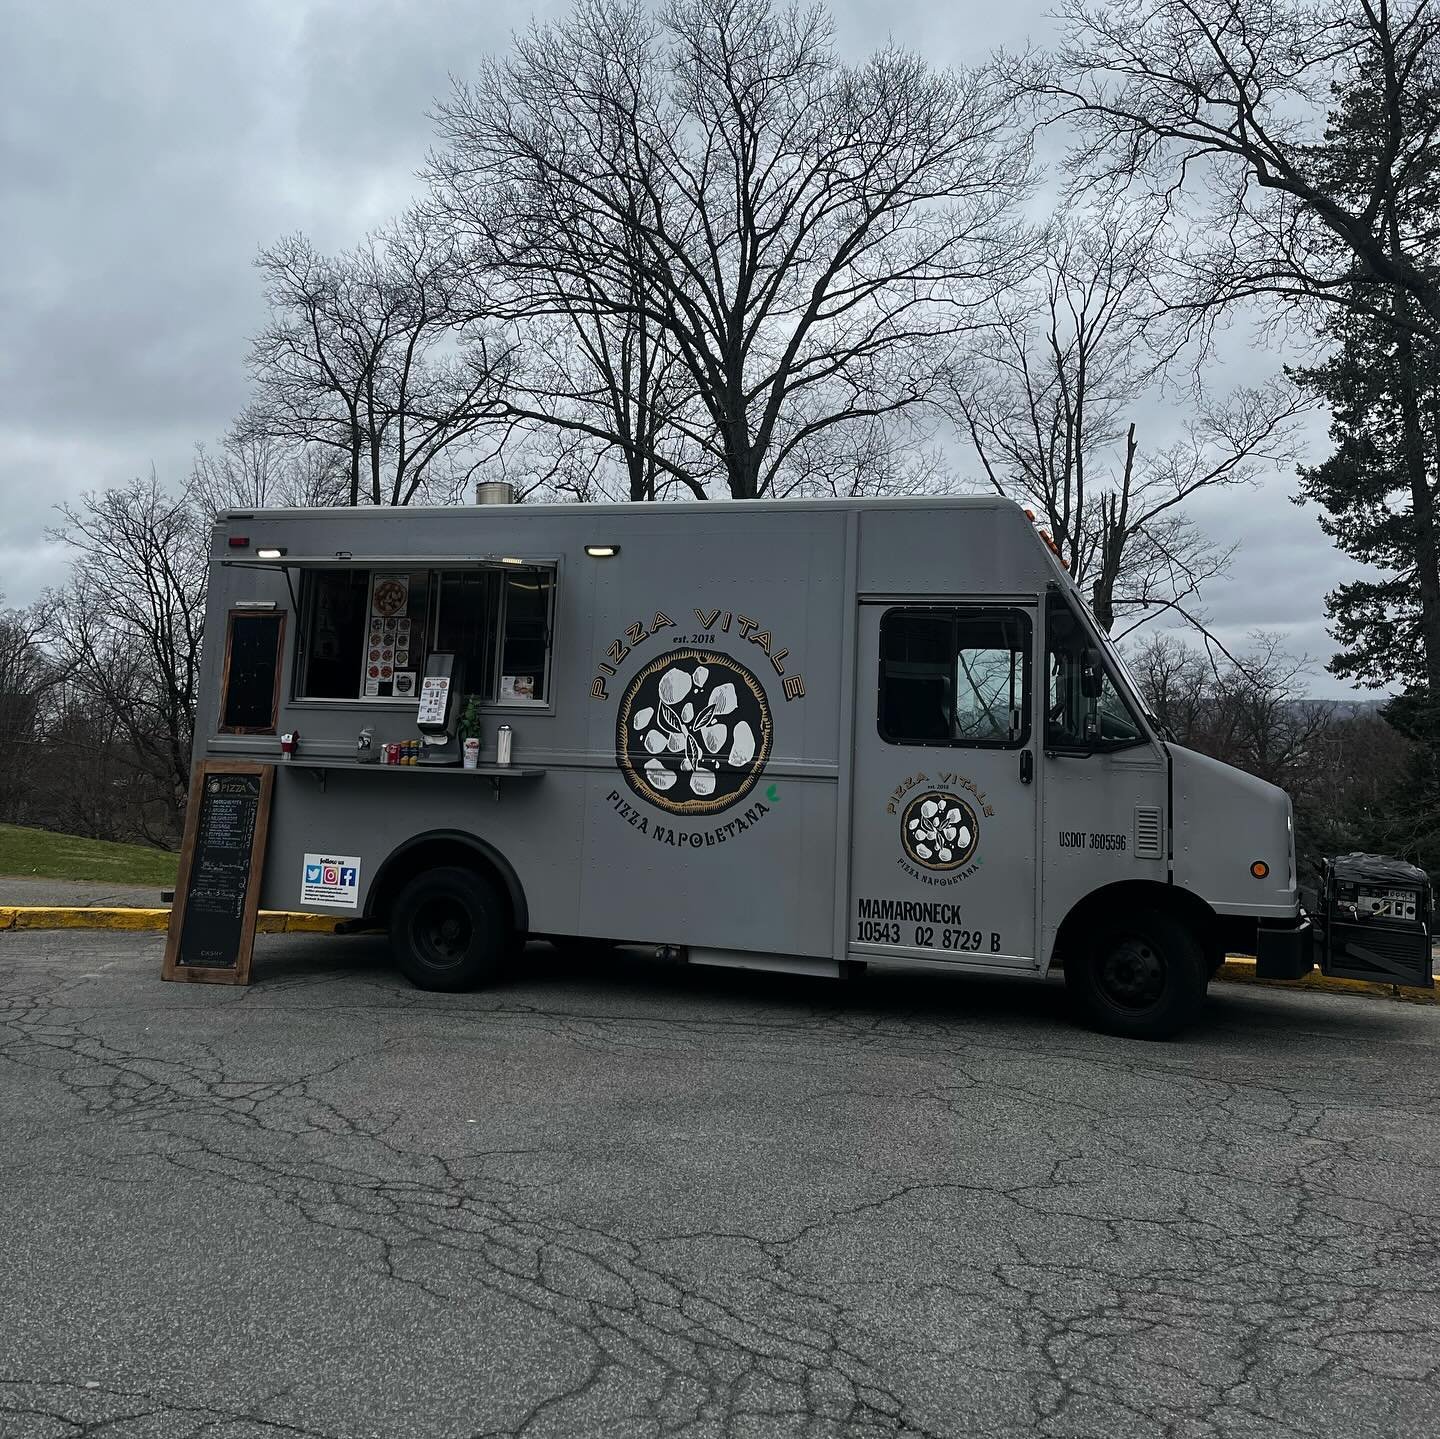 Happy Saturday! It&rsquo;s a little damp and cold outside but warm and cozy inside the @pizzavitale truck! Can you believe they have an entire wood-burning pizza oven inside the truck? Find them parked right outside the market and the perfect midway 